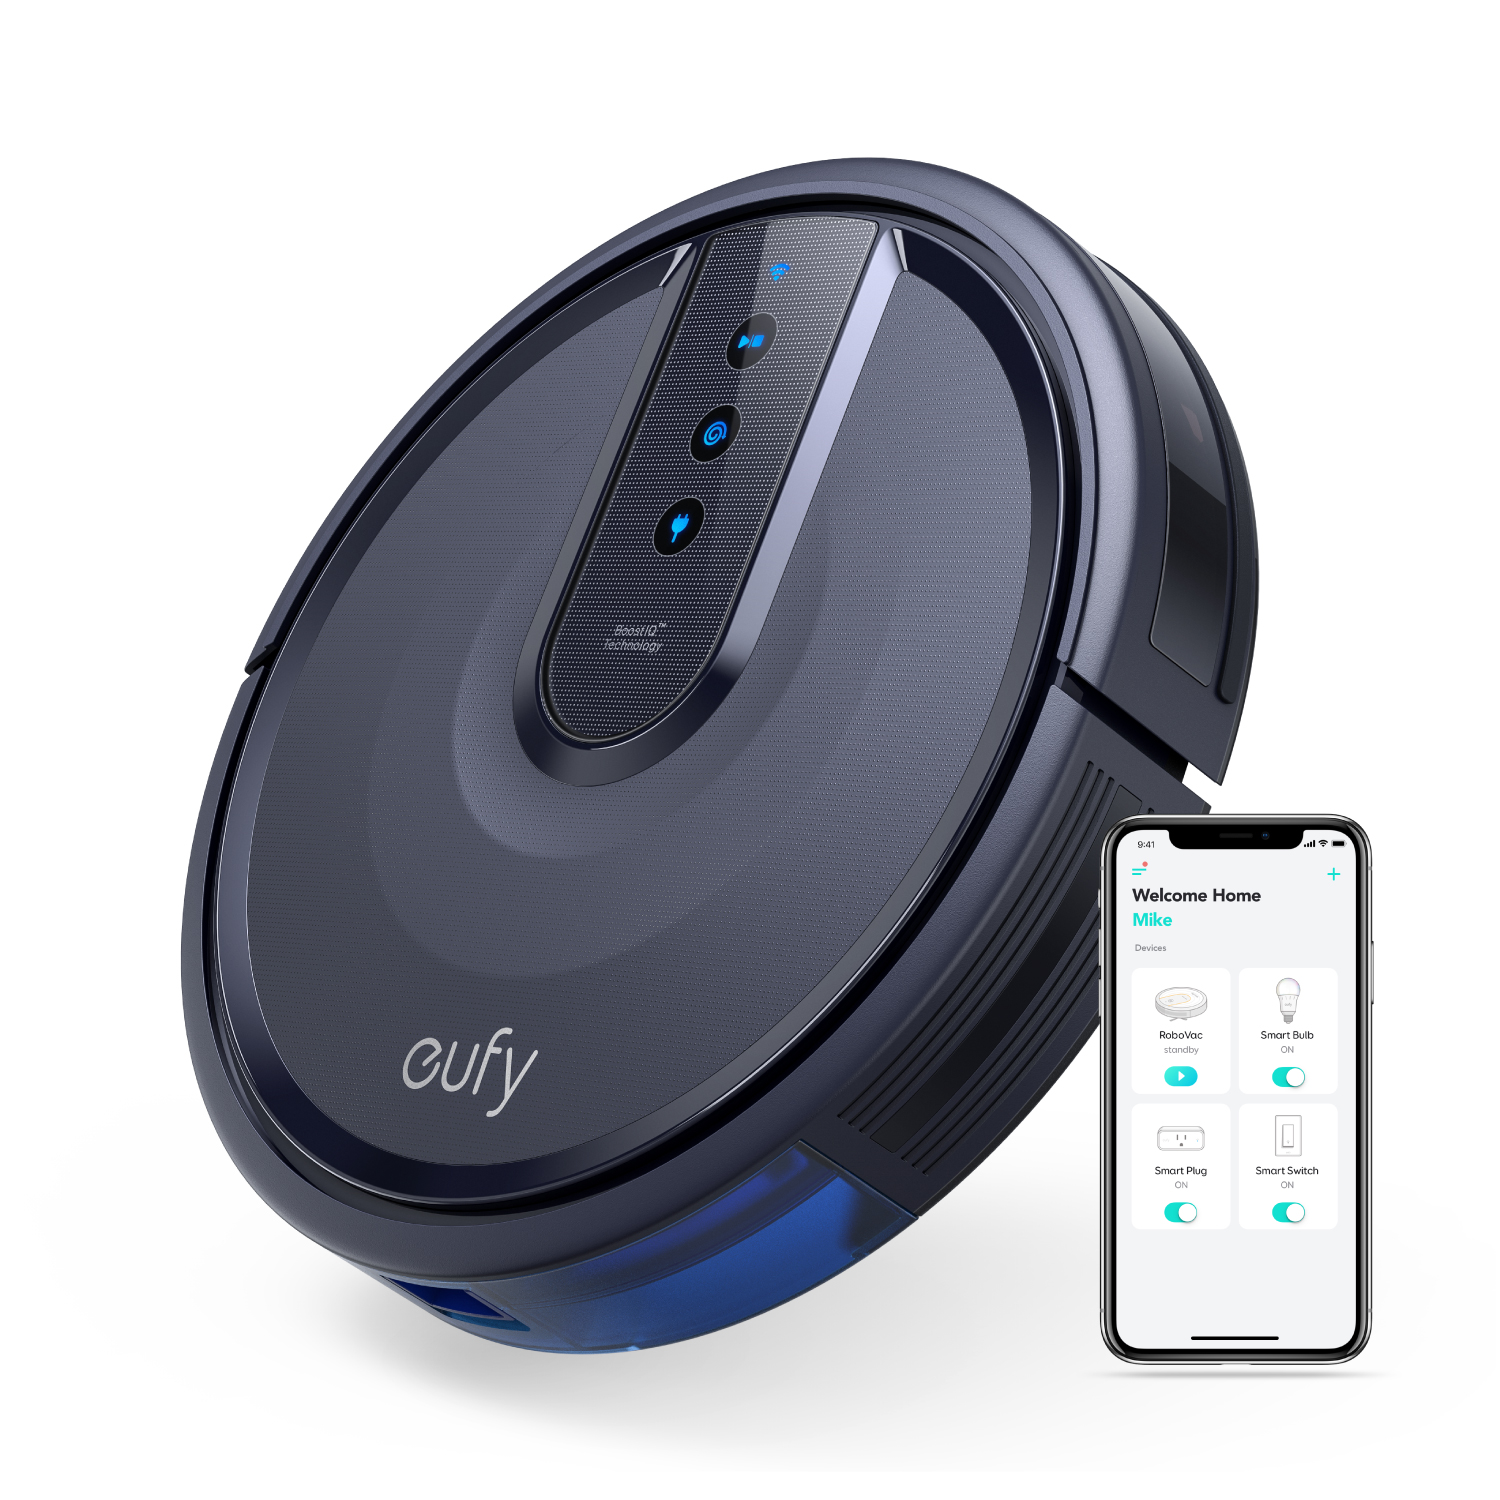 Anker eufy 25C Wi-Fi Connected Robot Vacuum, Great for Picking up Pet Hairs, Quiet, Slim - image 1 of 9